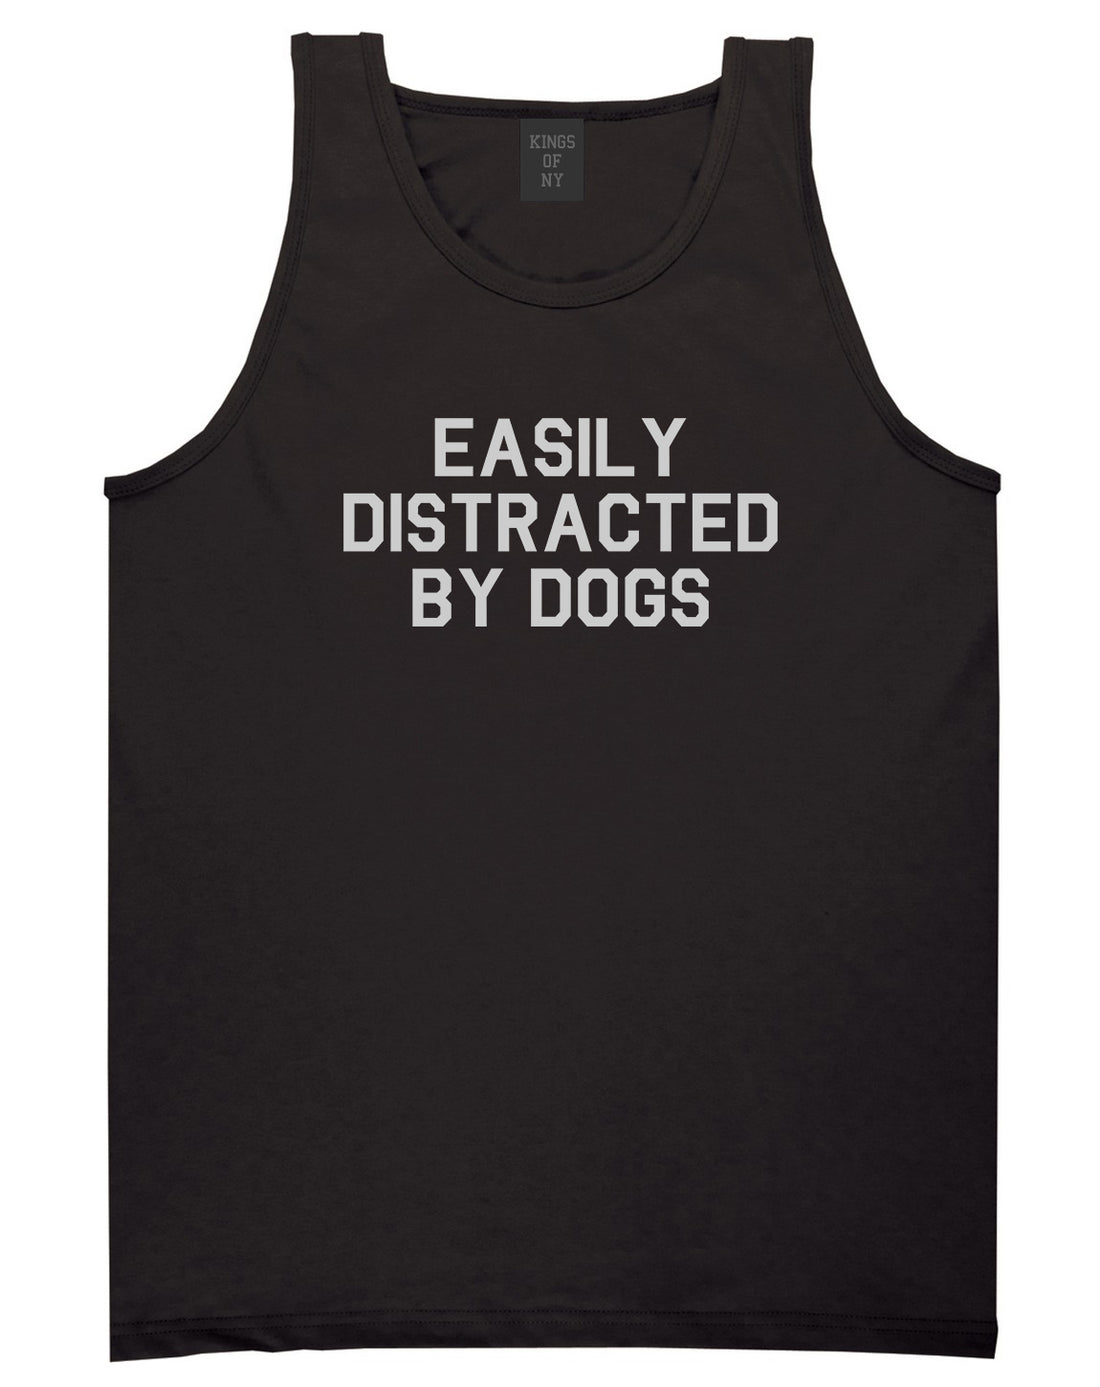 Easily Distracted By Dogs Mens Tank Top Shirt Black